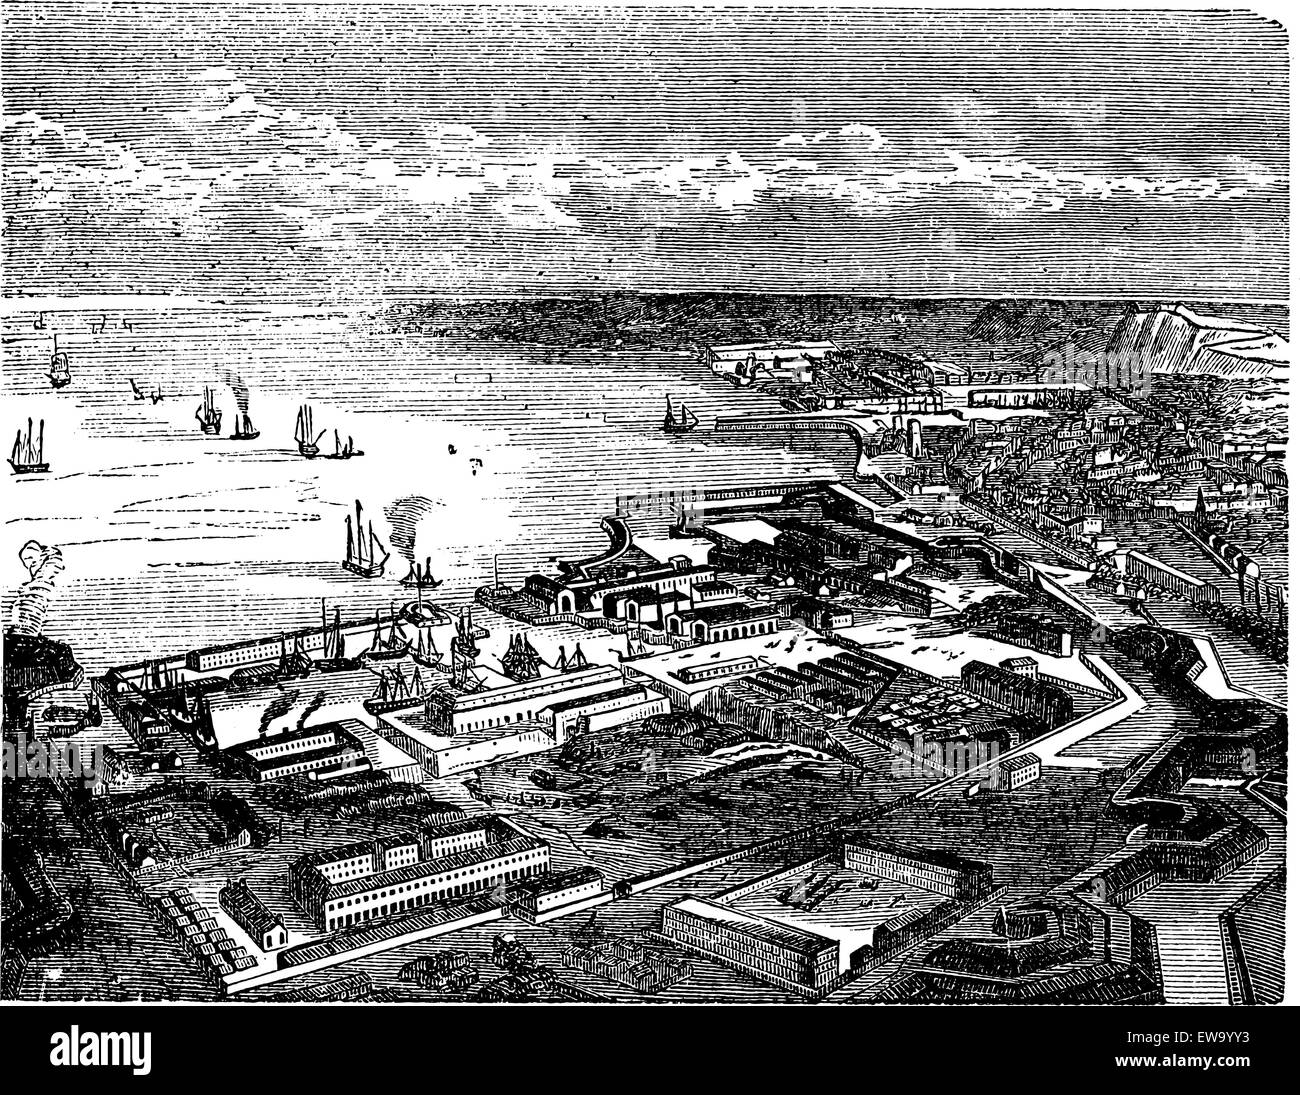 Cherbourg-Octeville, in Normandy, France, during the 1890s, vintage engraving. Old engraved illustration of Cherbourg-Octeville. Stock Vector